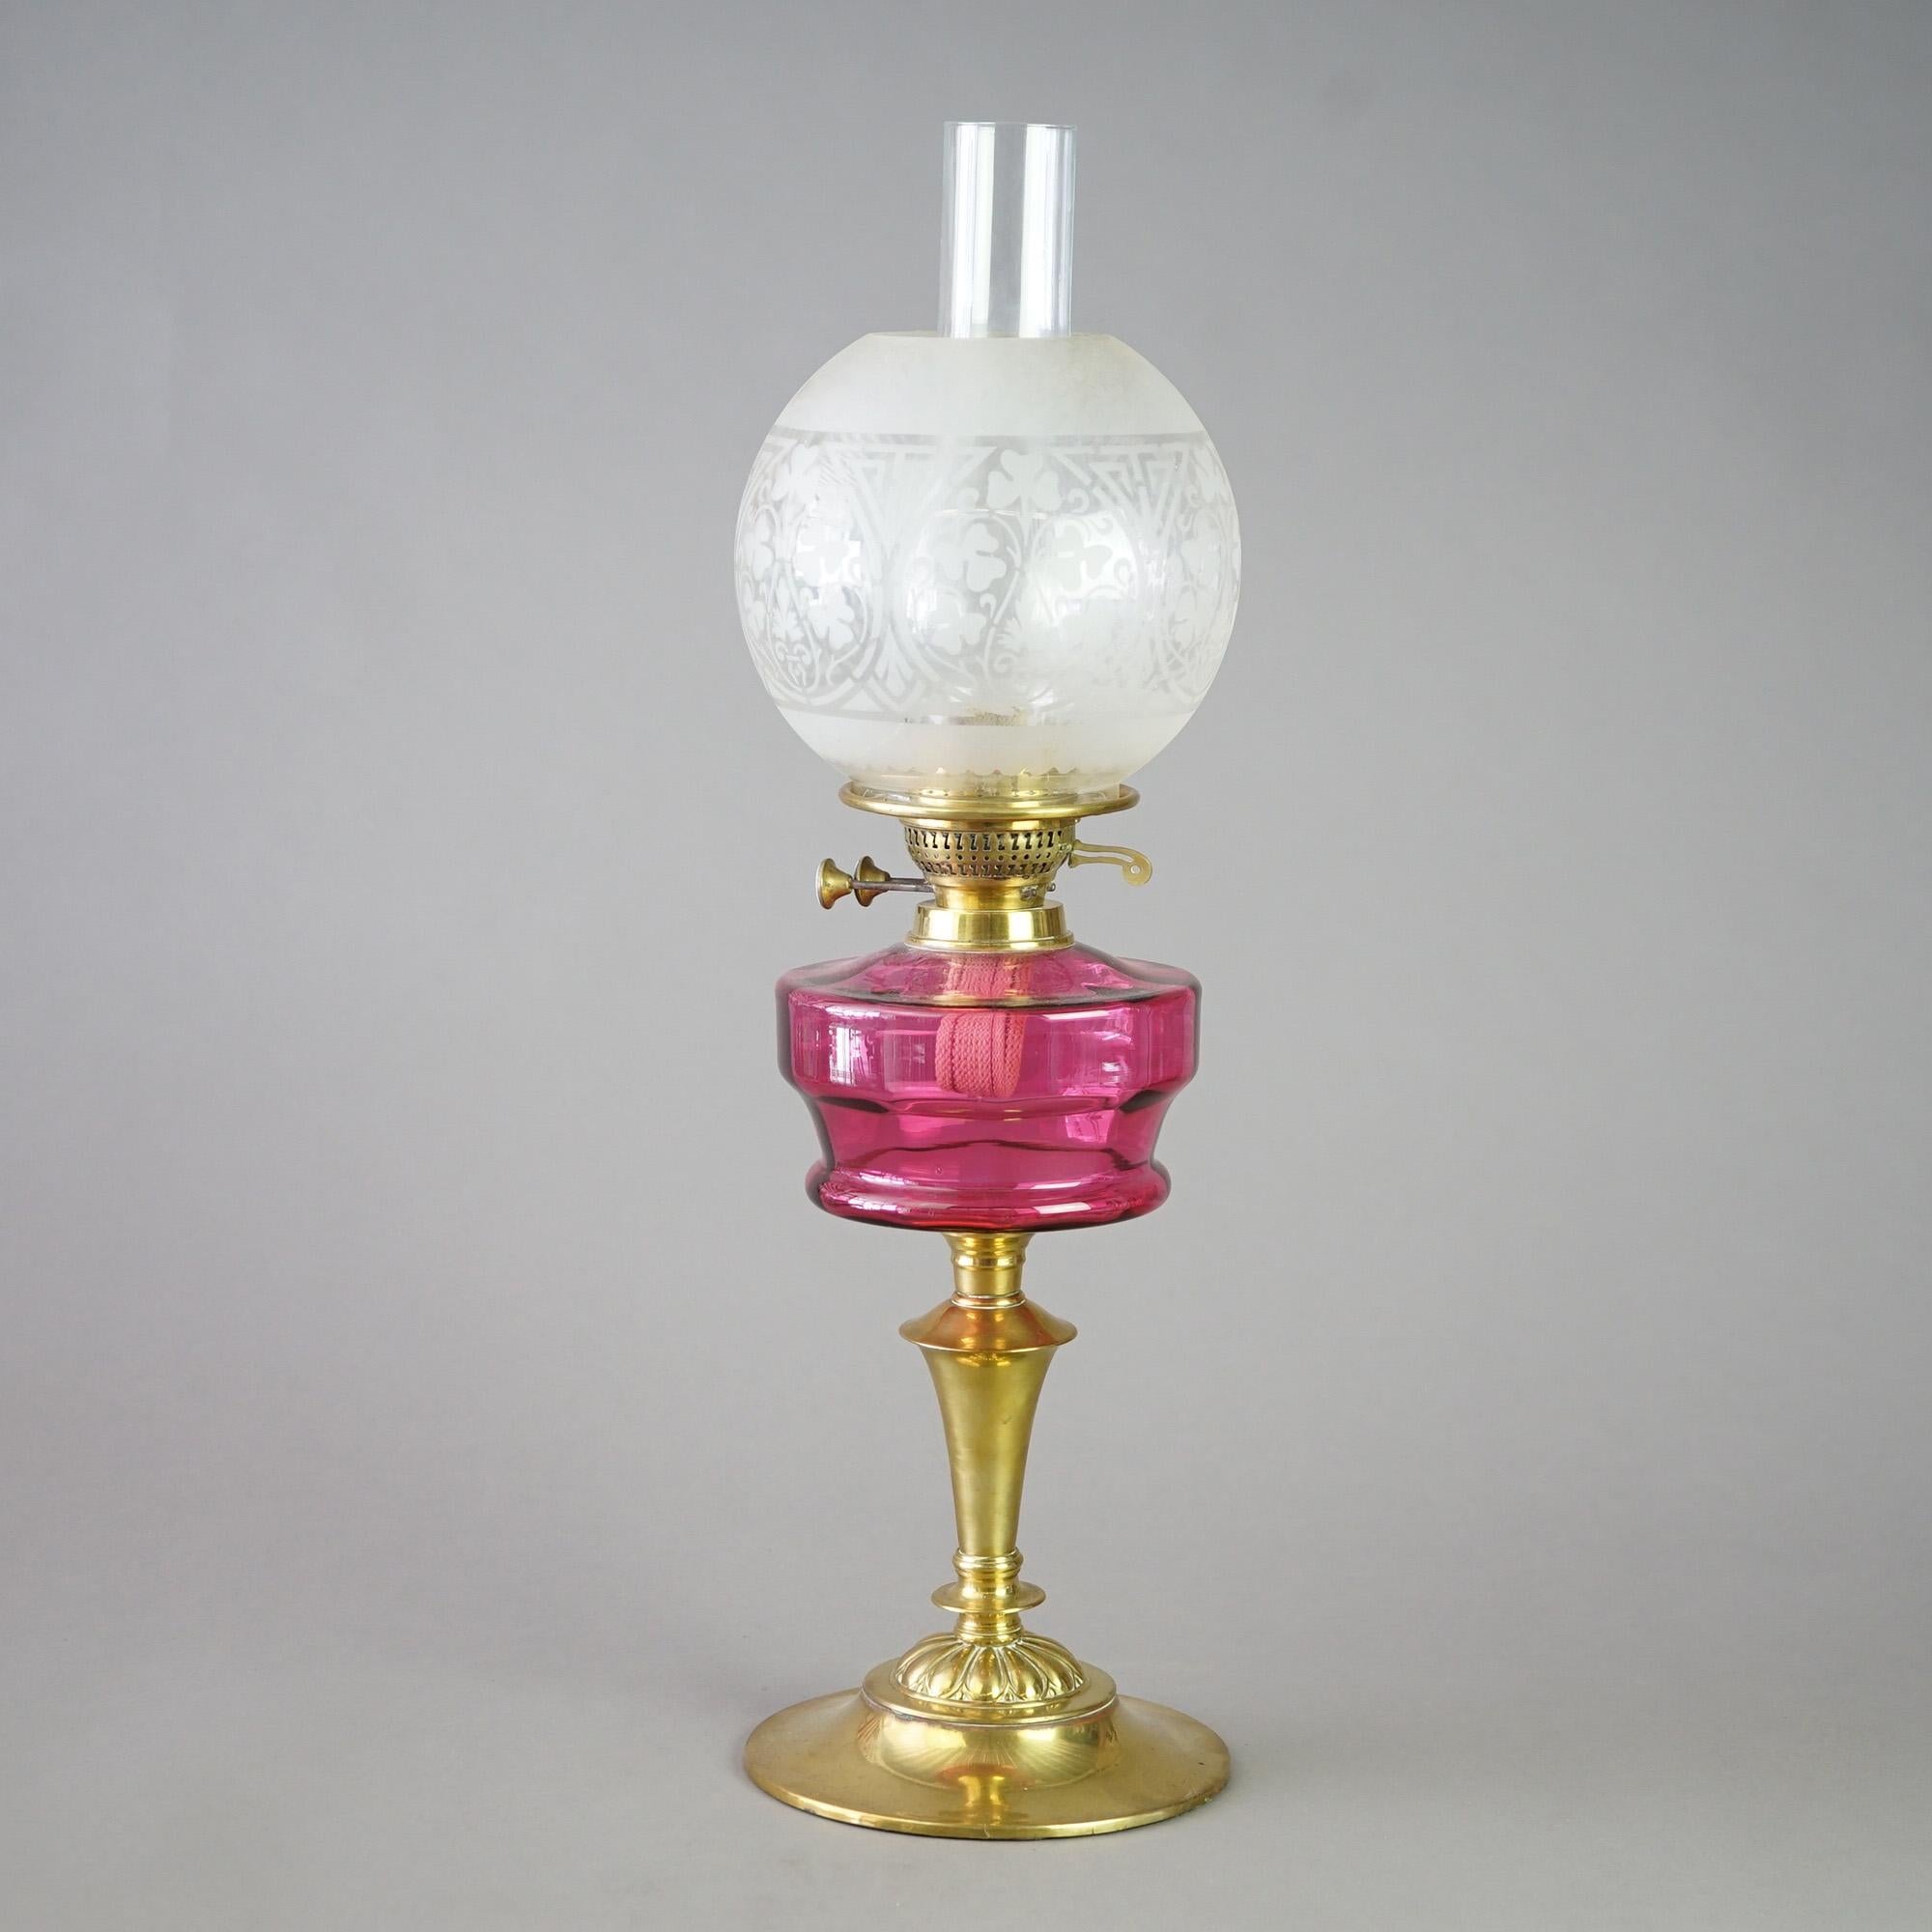 American Antique Brass &Cranberry Glass “Gone With The Wind” Oil Lamp C1890 For Sale